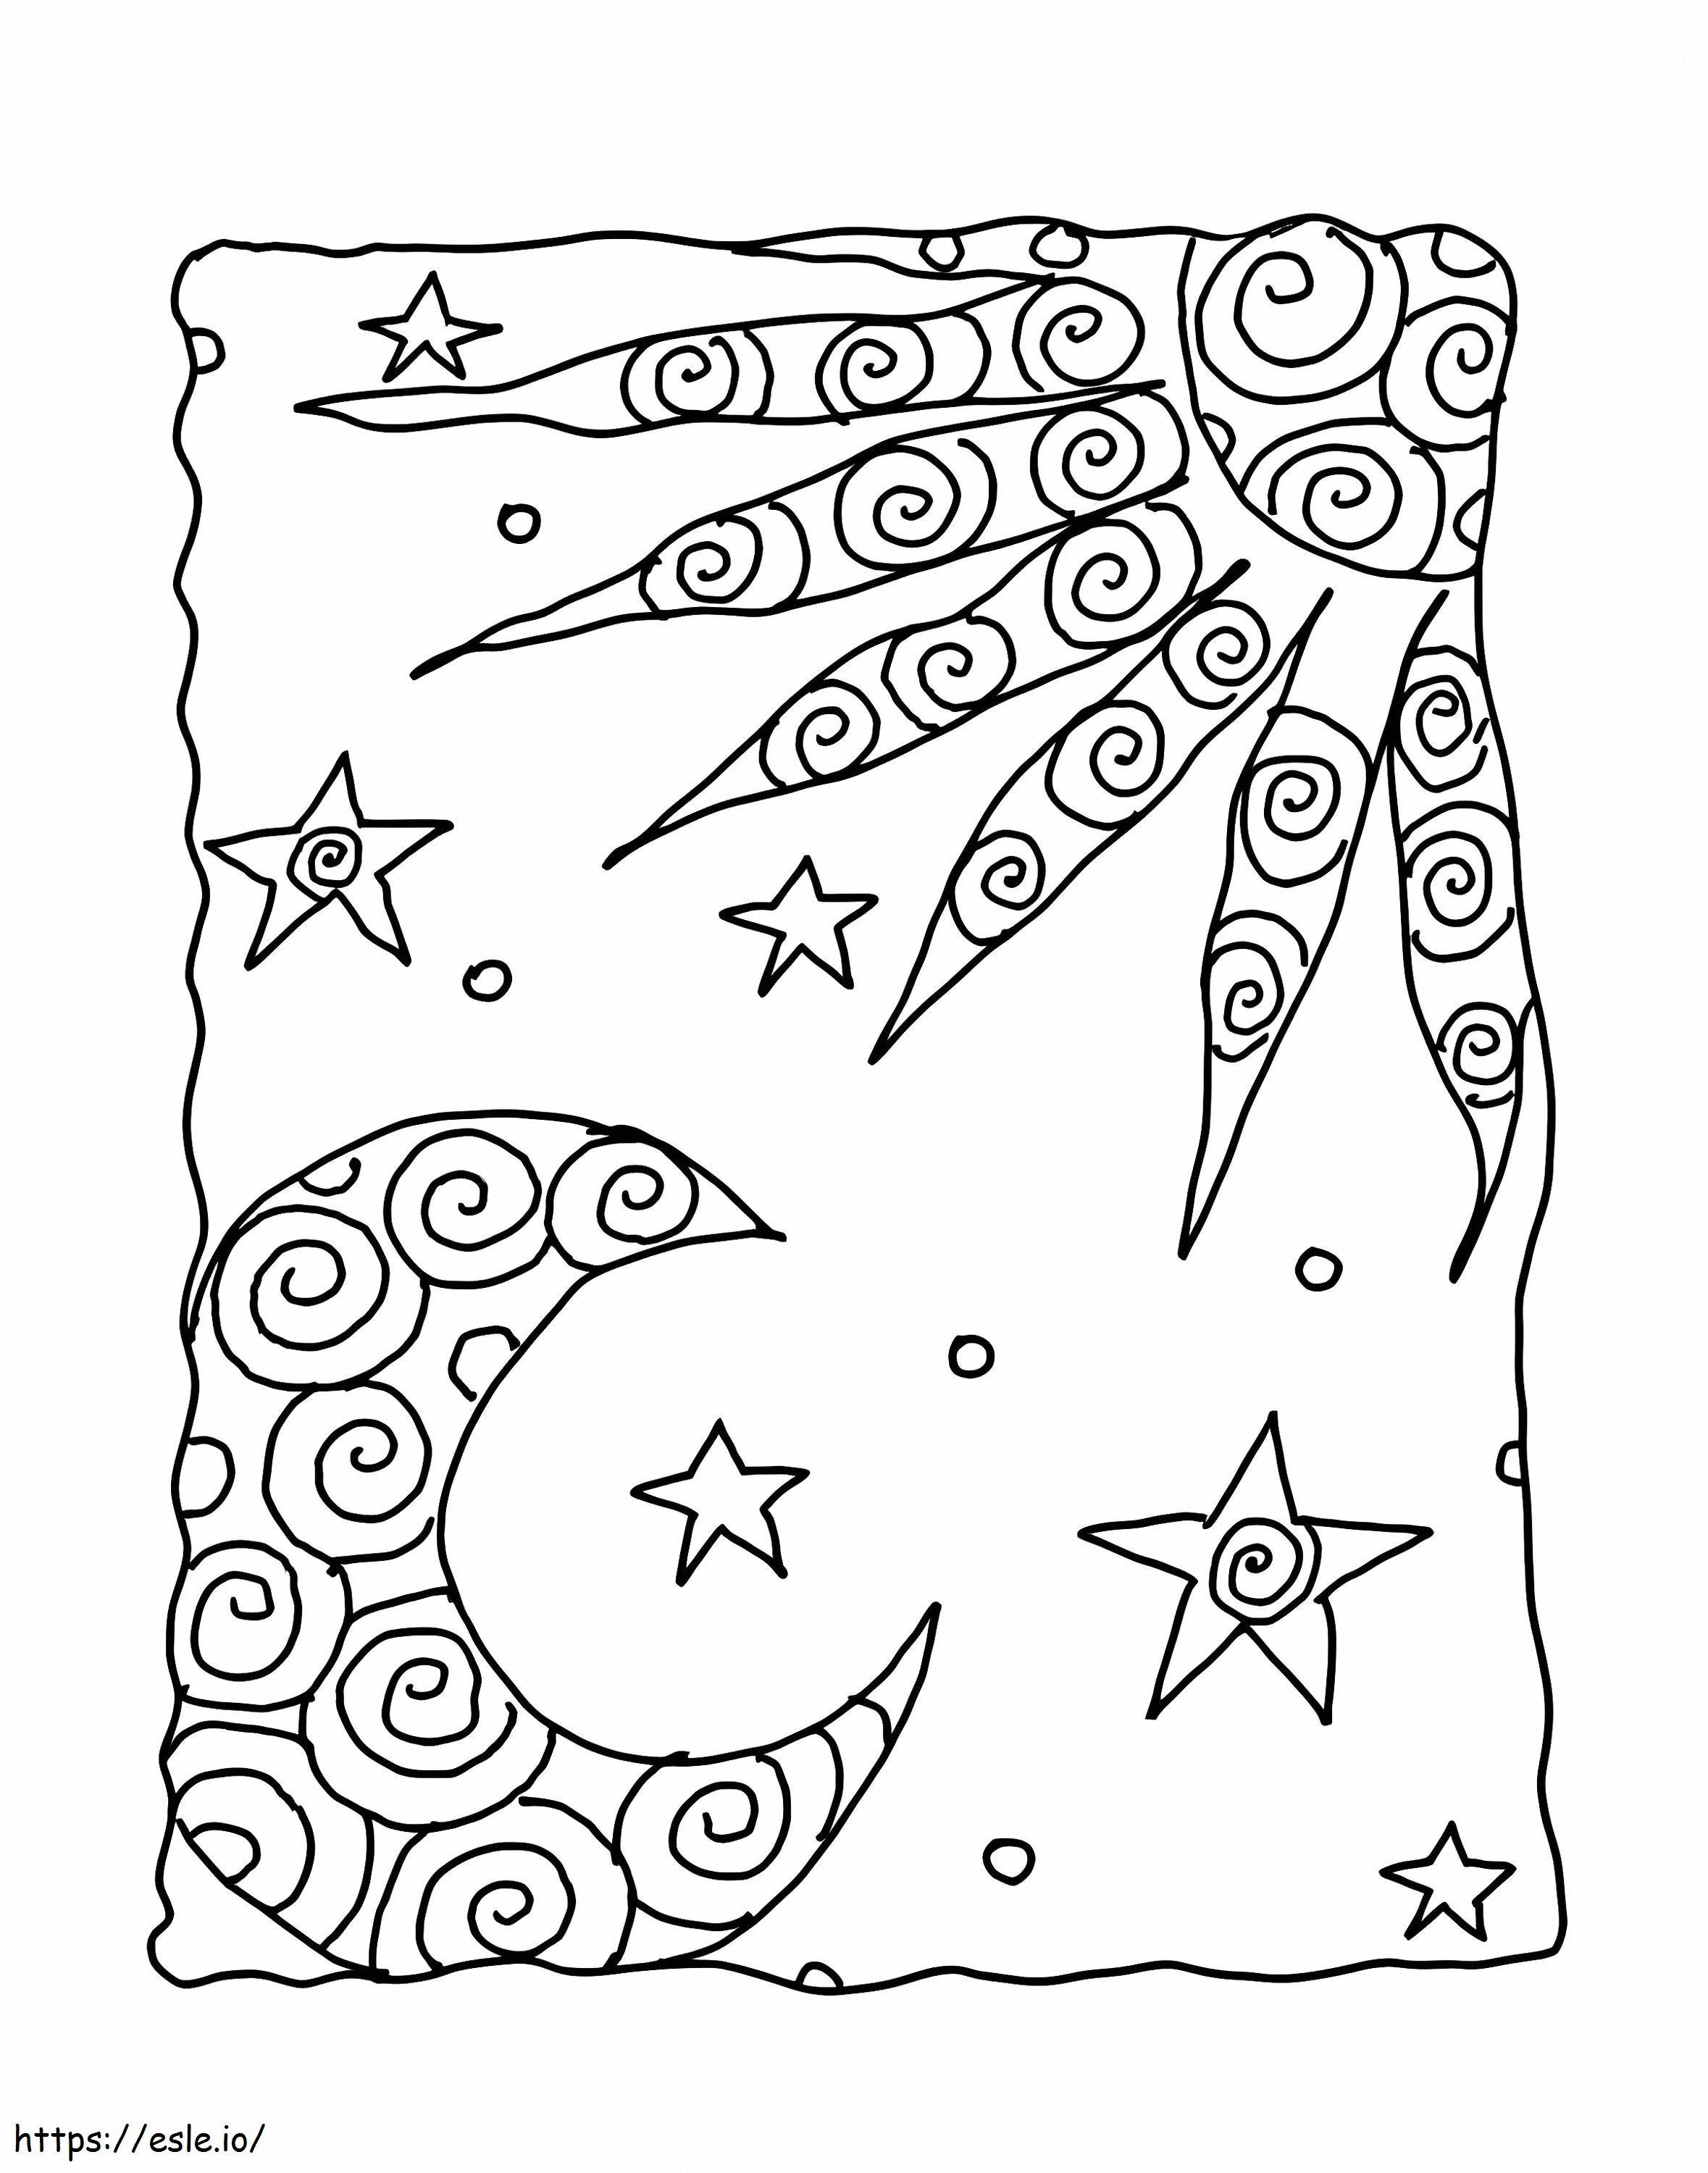 Printable Sun And Moon For Adult coloring page